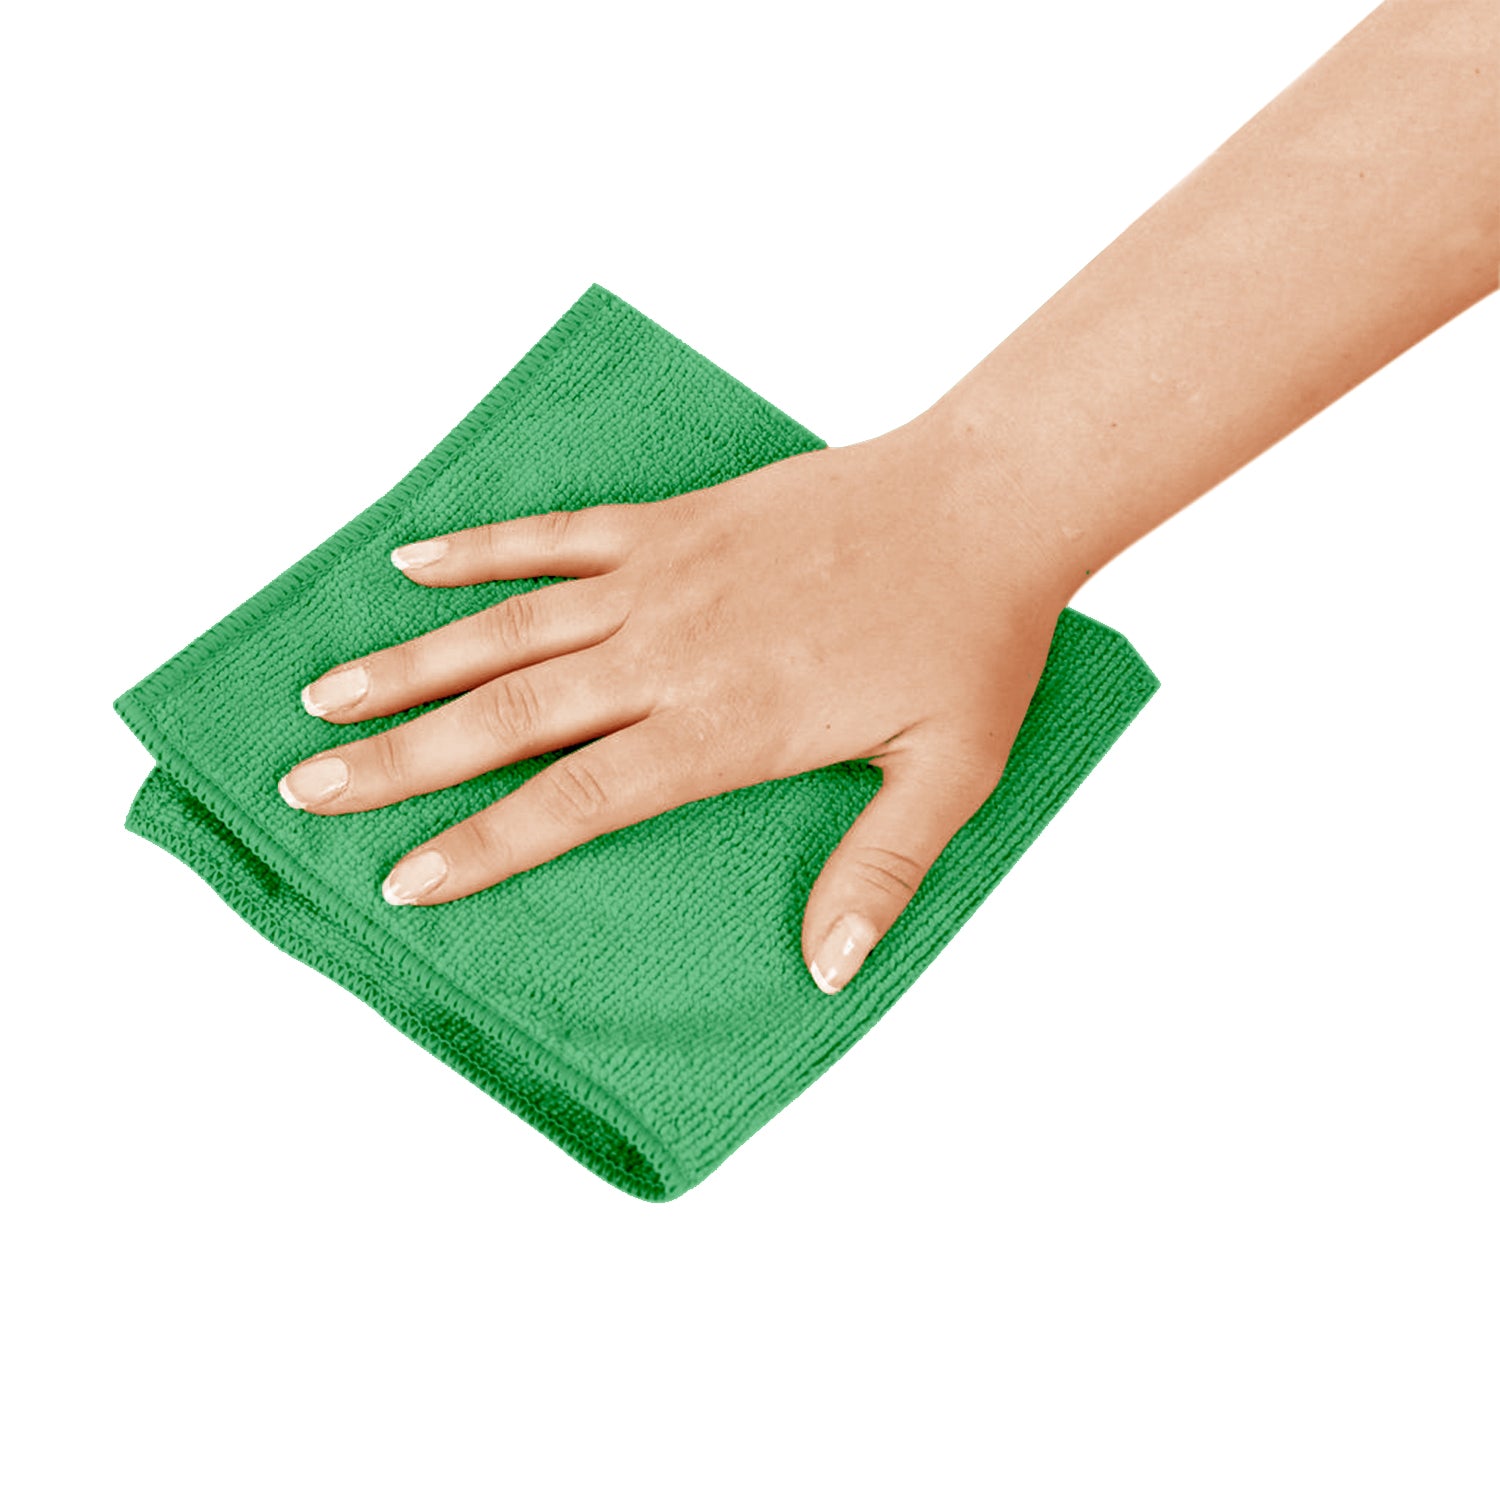 Microfiber cloth 16 x 16 green for general cleaning - MDI